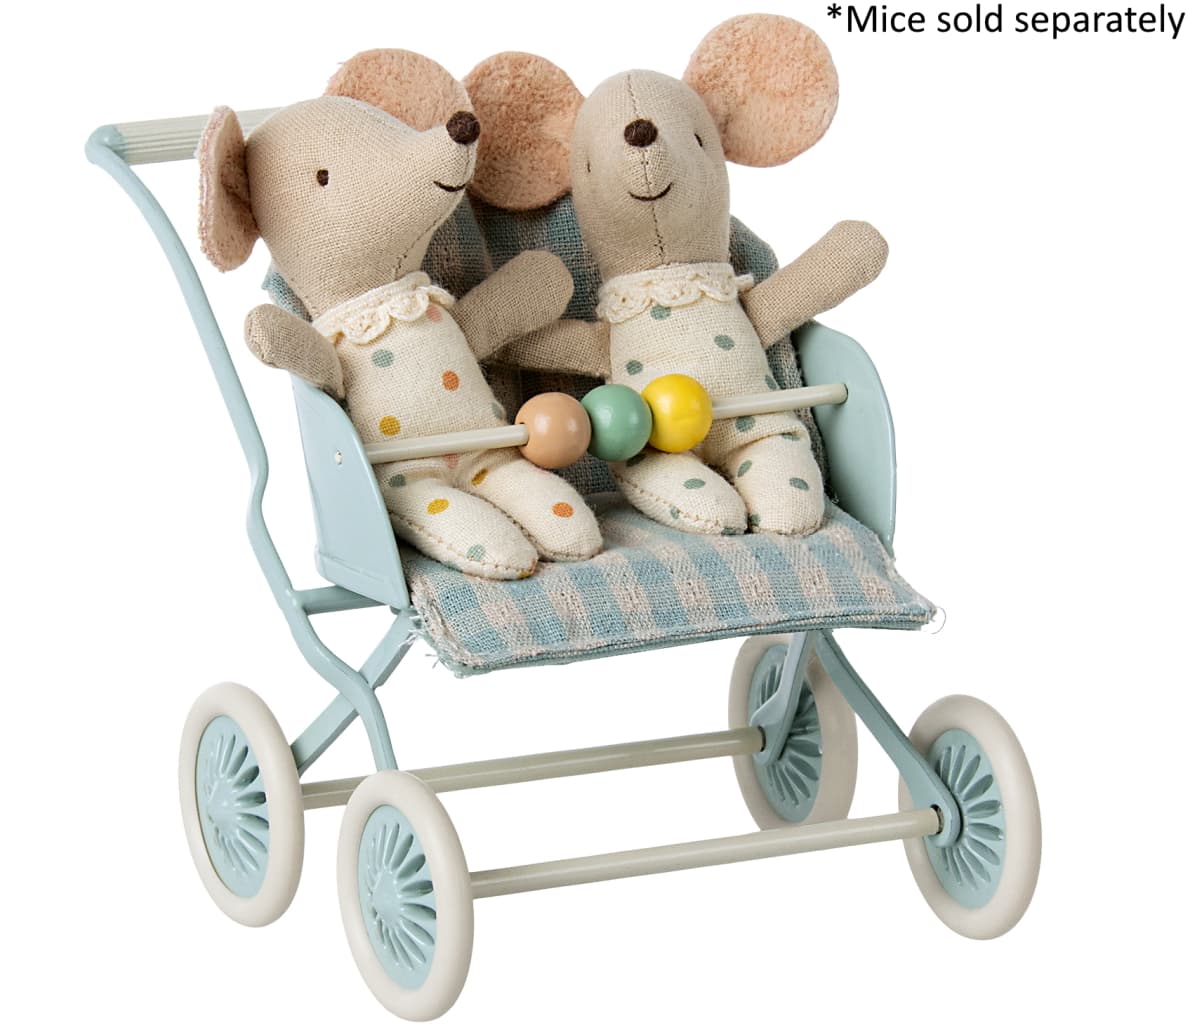 Maileg Mint Stroller - Mice Sold Separately